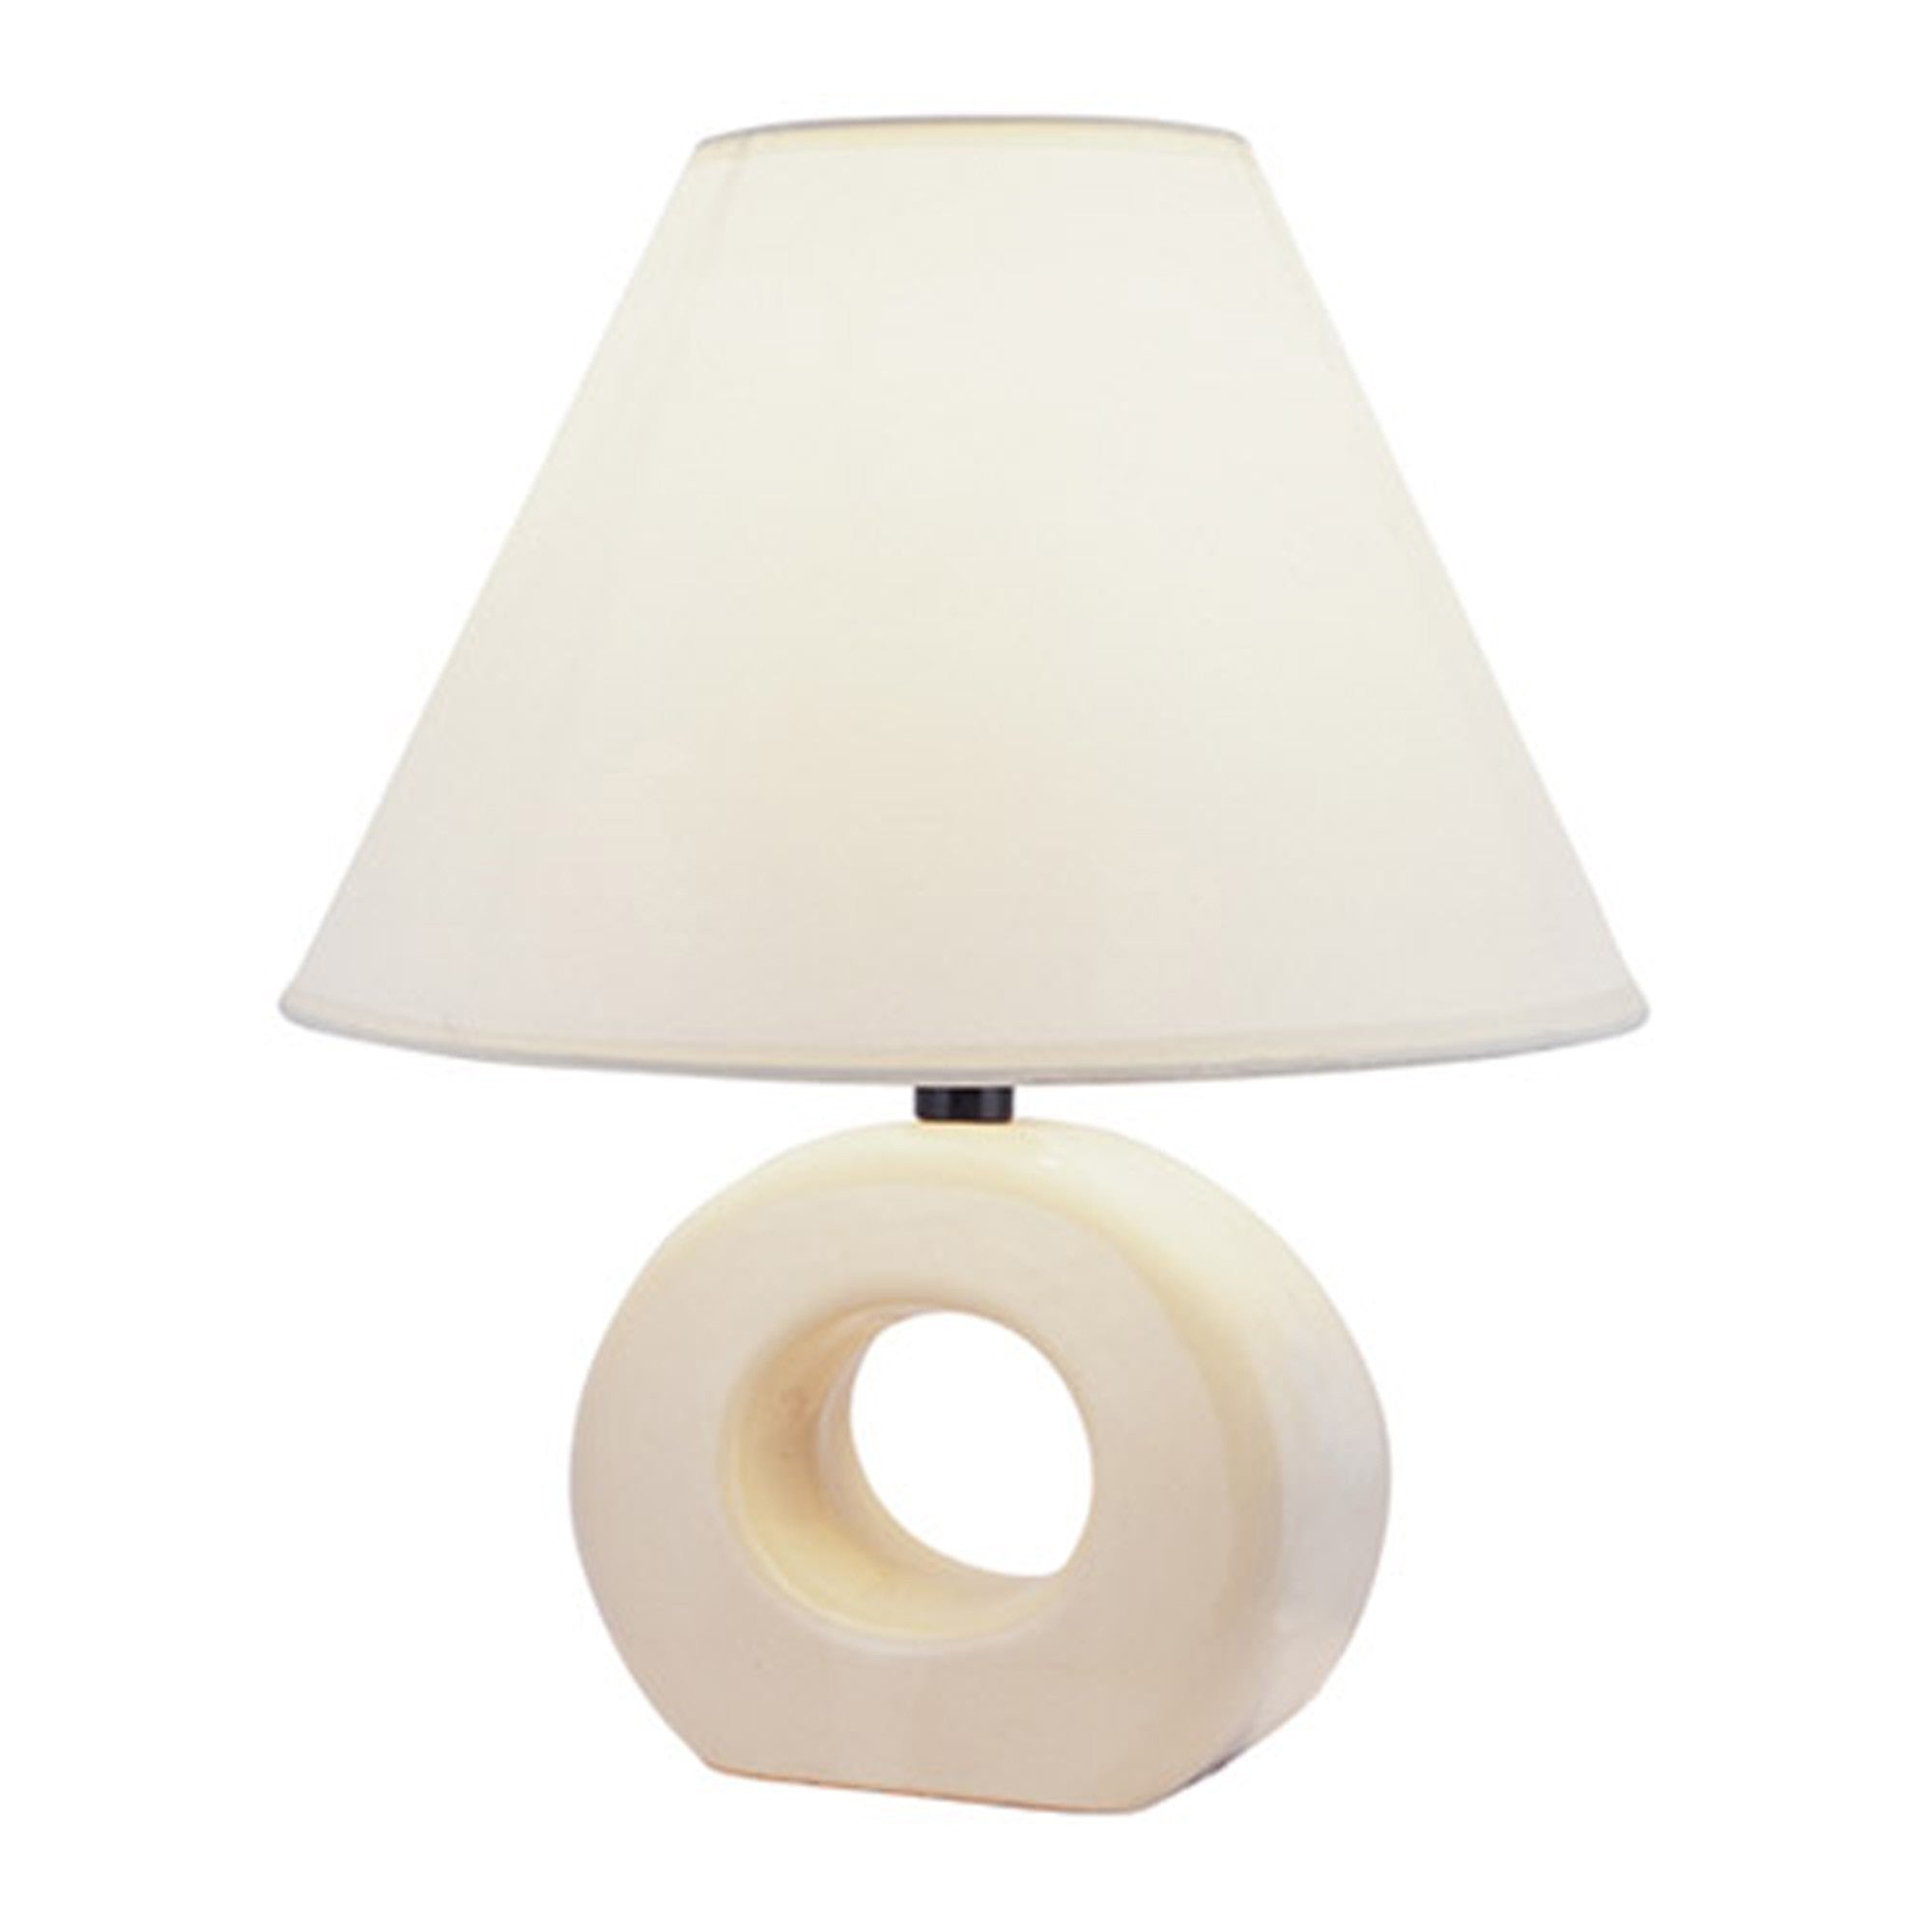 12" Beige Ceramic Bedside Table Lamp With White Empire Shade - Tuesday Morning-Table Lamps